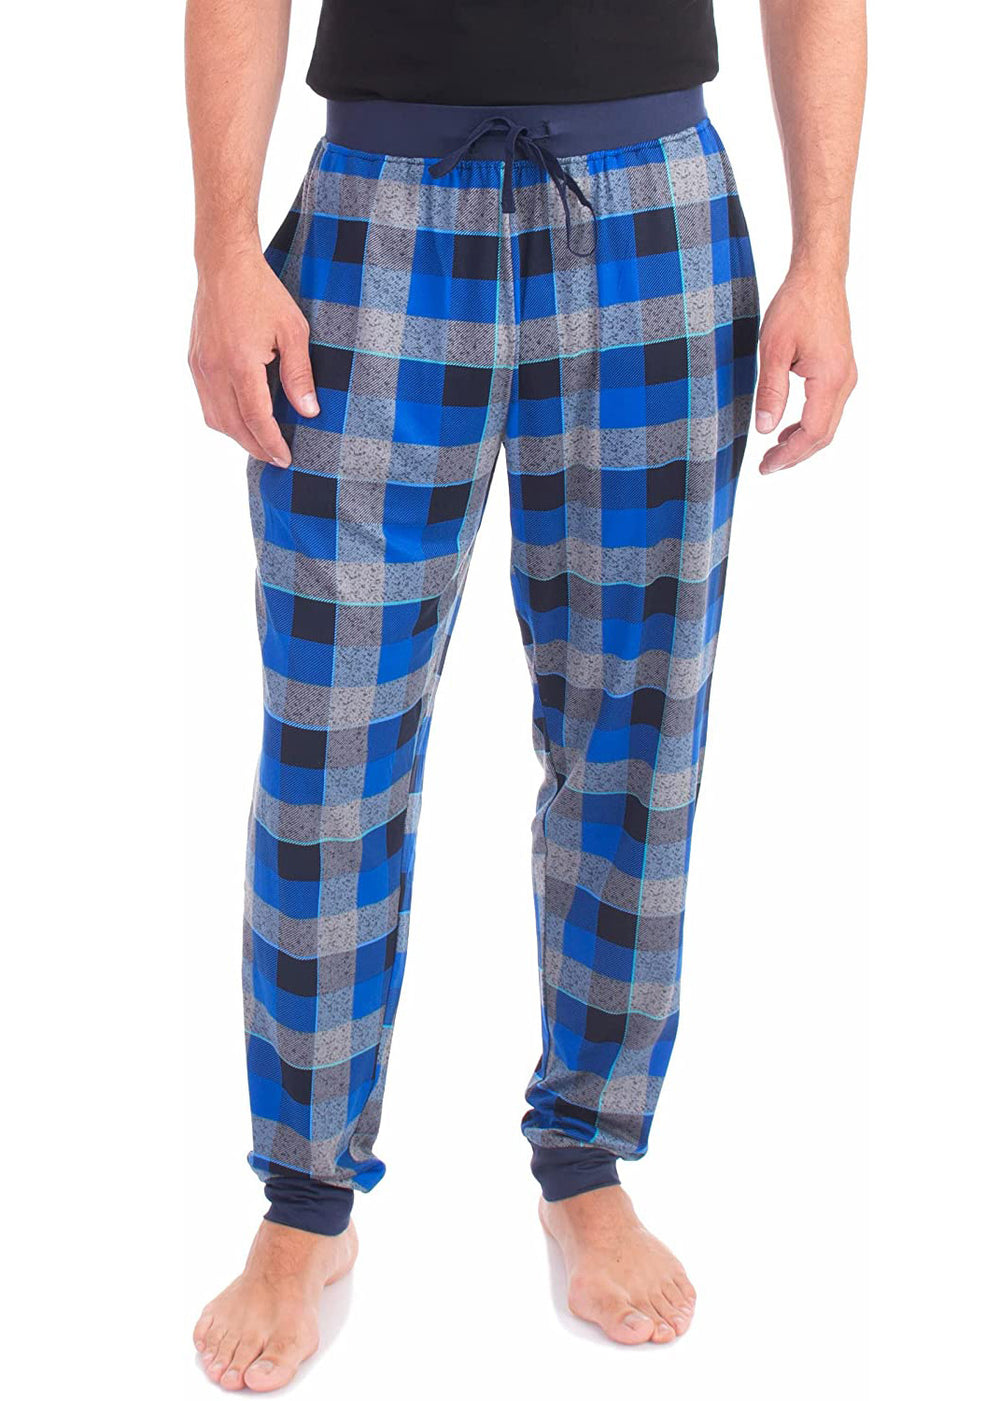 PJ joggers with soft velvety texture, stretch, elastic waistband, drawstring, and stylish ankle cuff. This pattern is a grey, black and cobalt plaid. The waist and the cuffs are navy